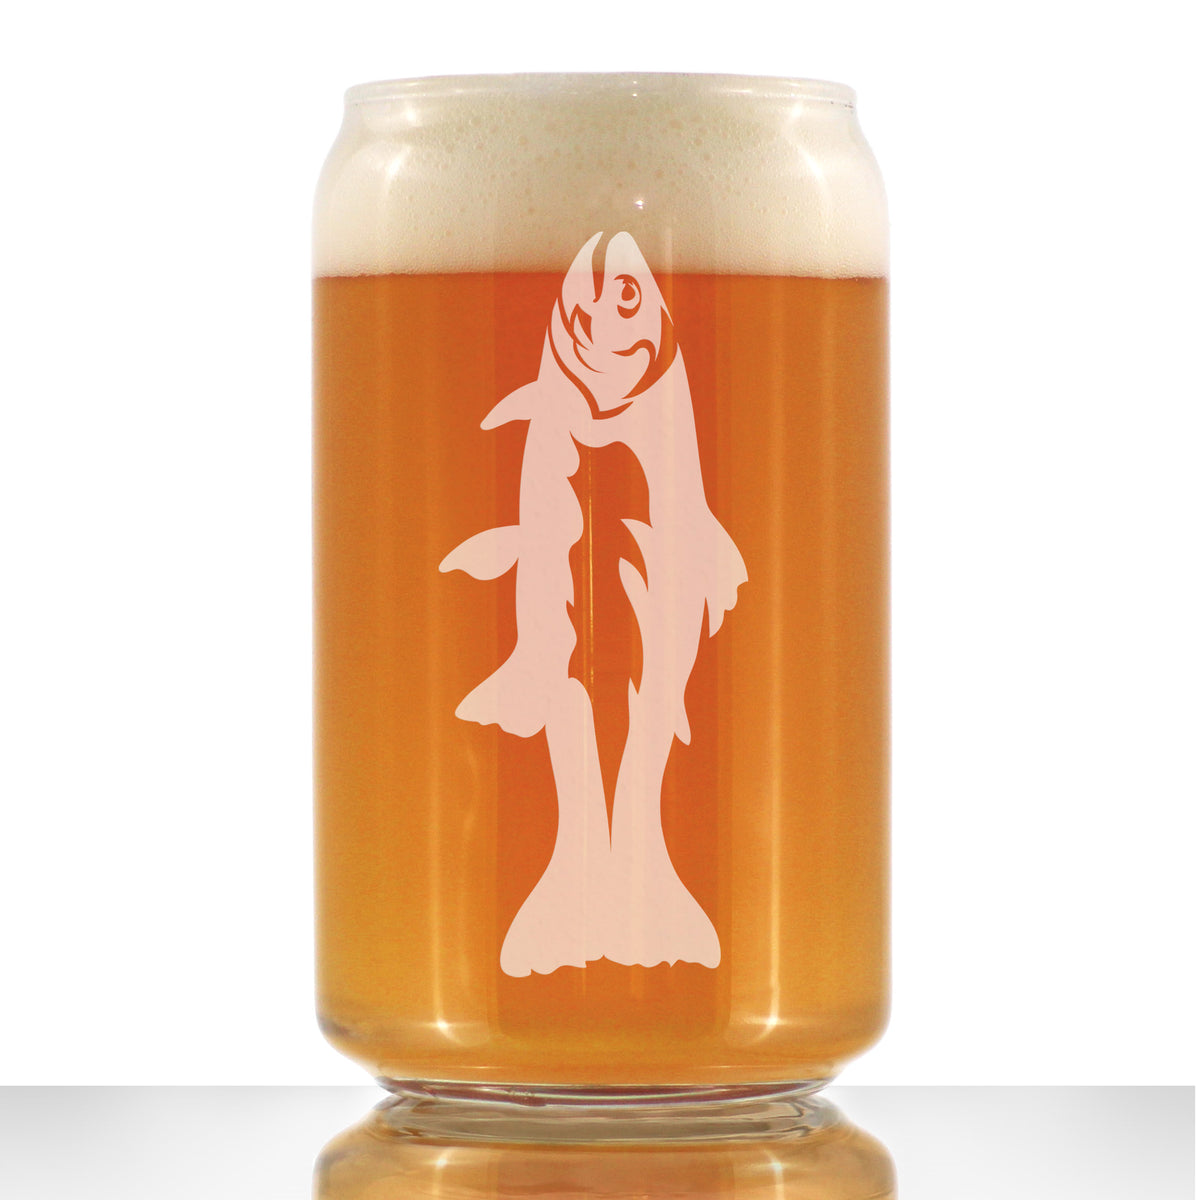 Trout - Beer Can Pint Glass - Trout Fishing Gifts for Fisherman - Fun Fish Cups &amp; Lake House Decor - 16 oz